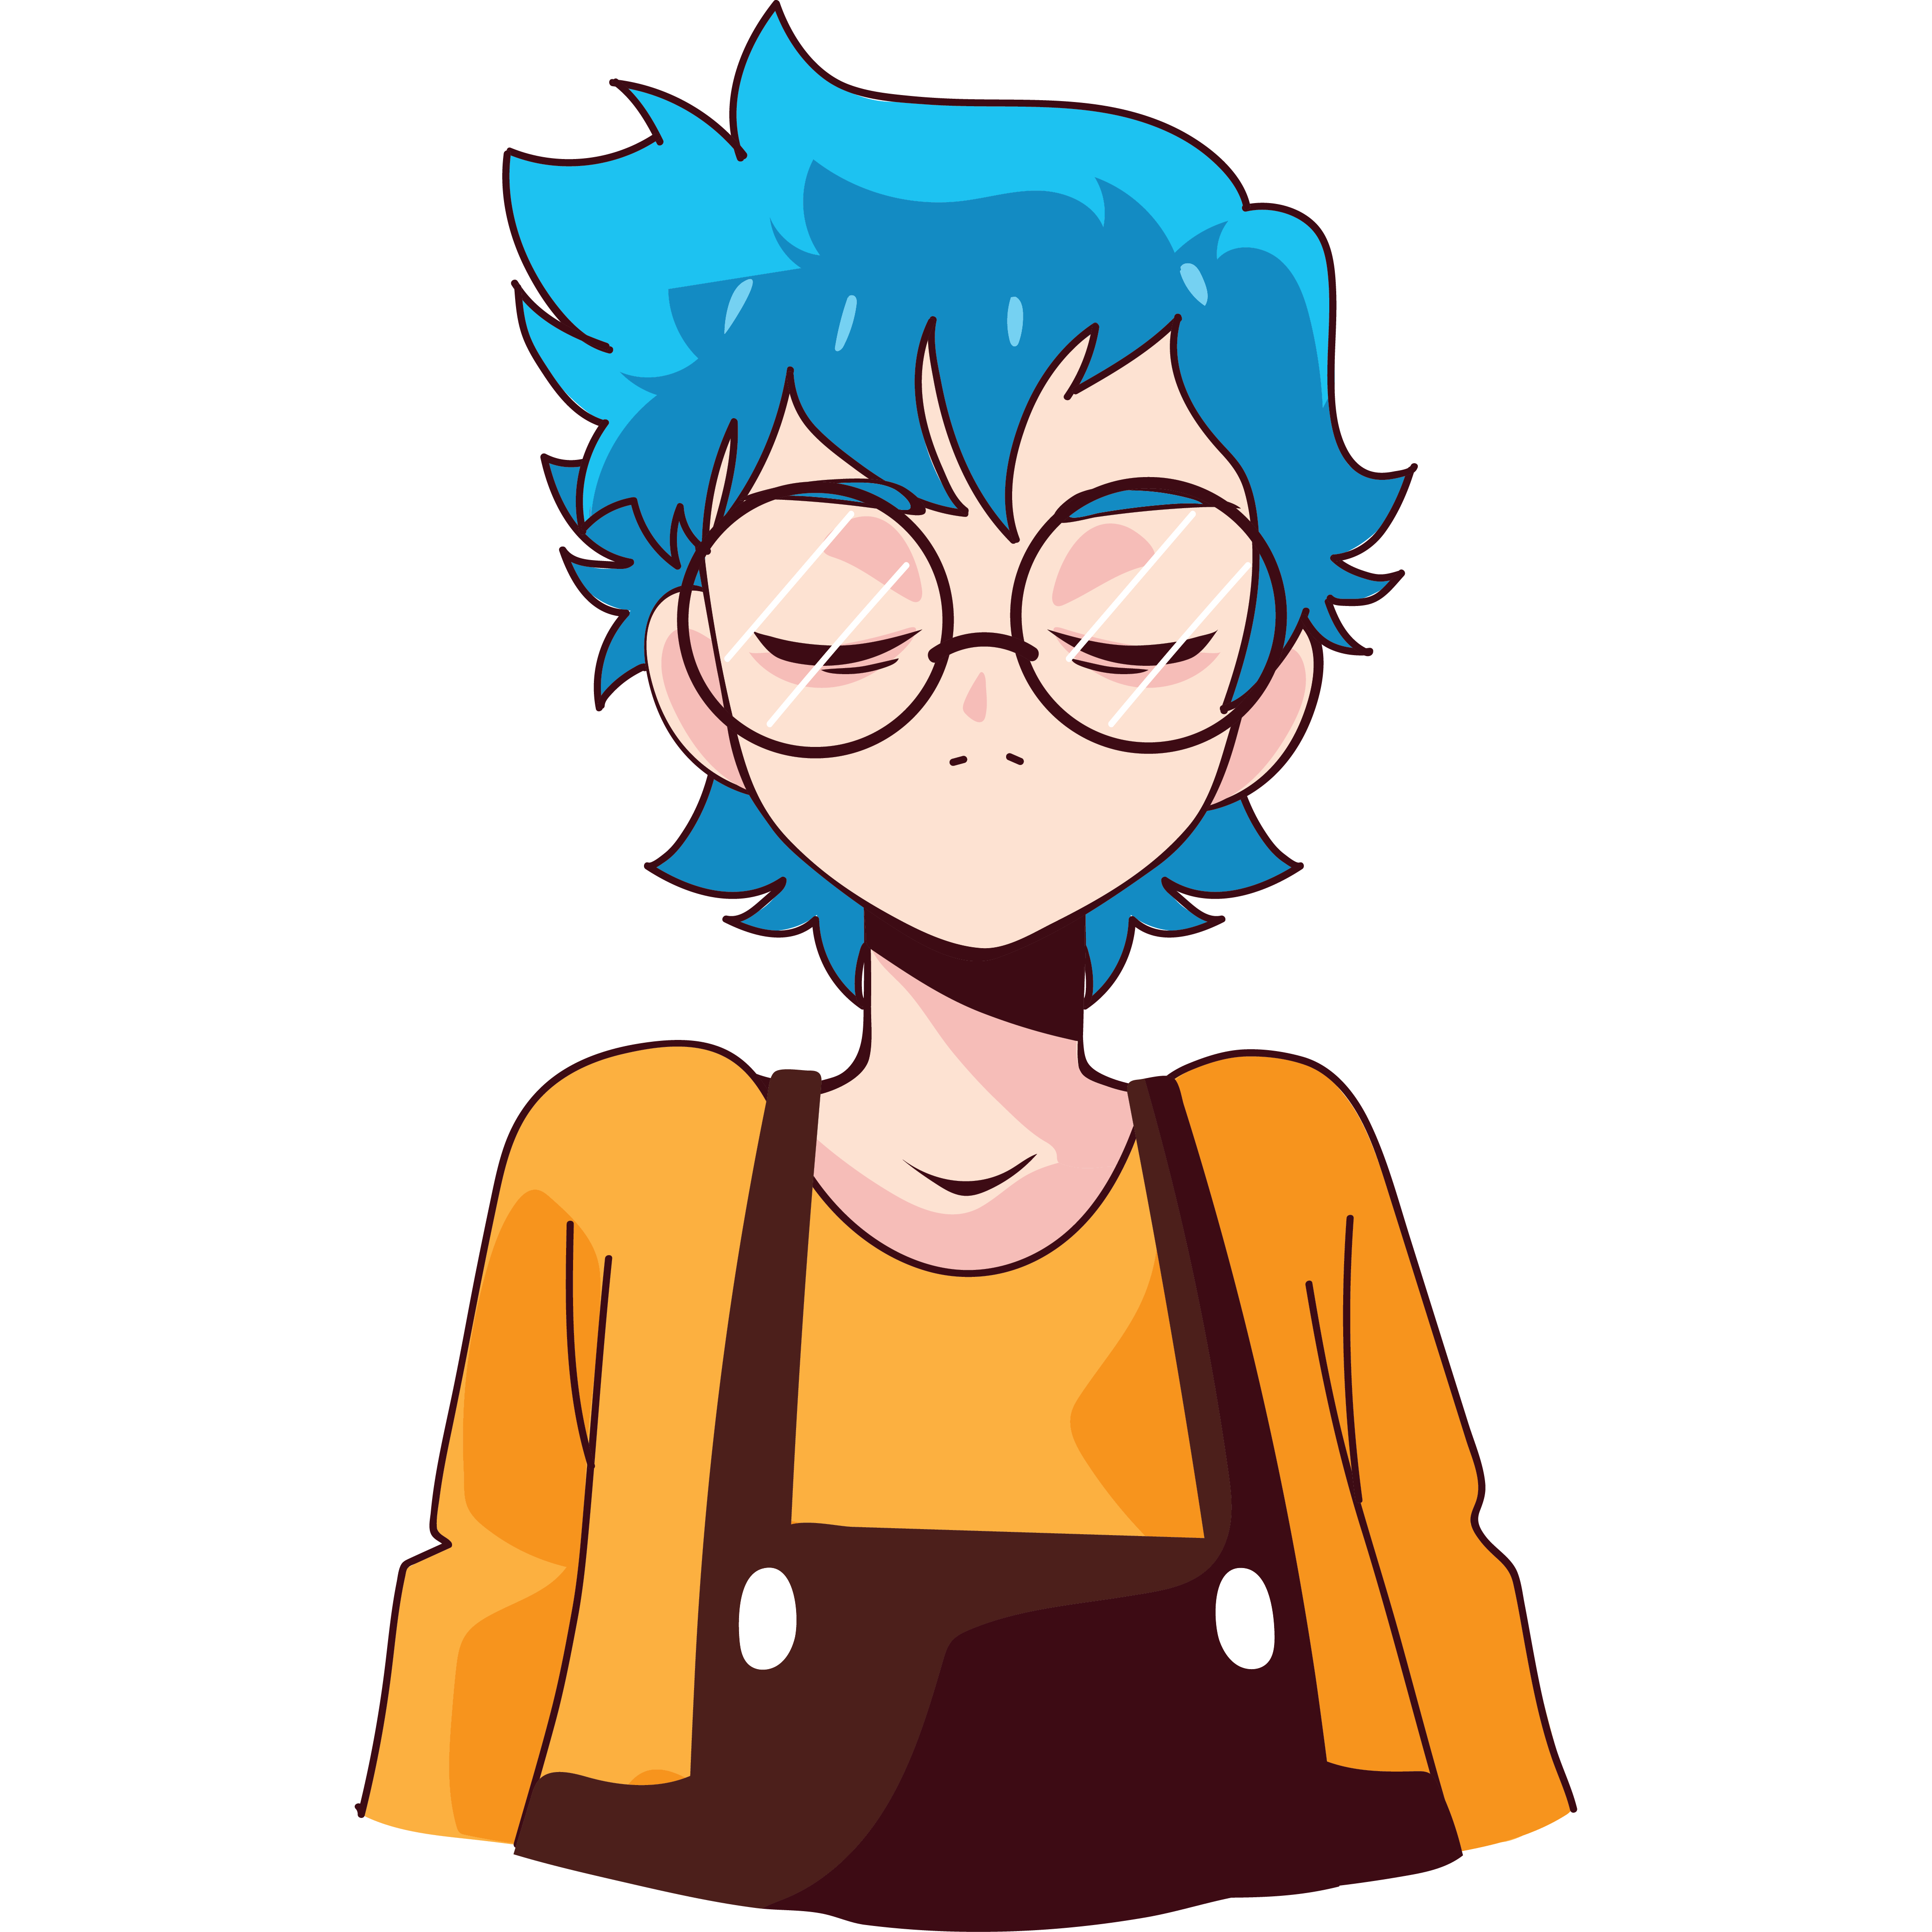 cartoon, cute, blue, face, eyes, glasses, japanese, asian, character, anime, illustration, drawing, comic, male , usa, manga, nerd, beauty, isolated, young, animation, vector , smaile,